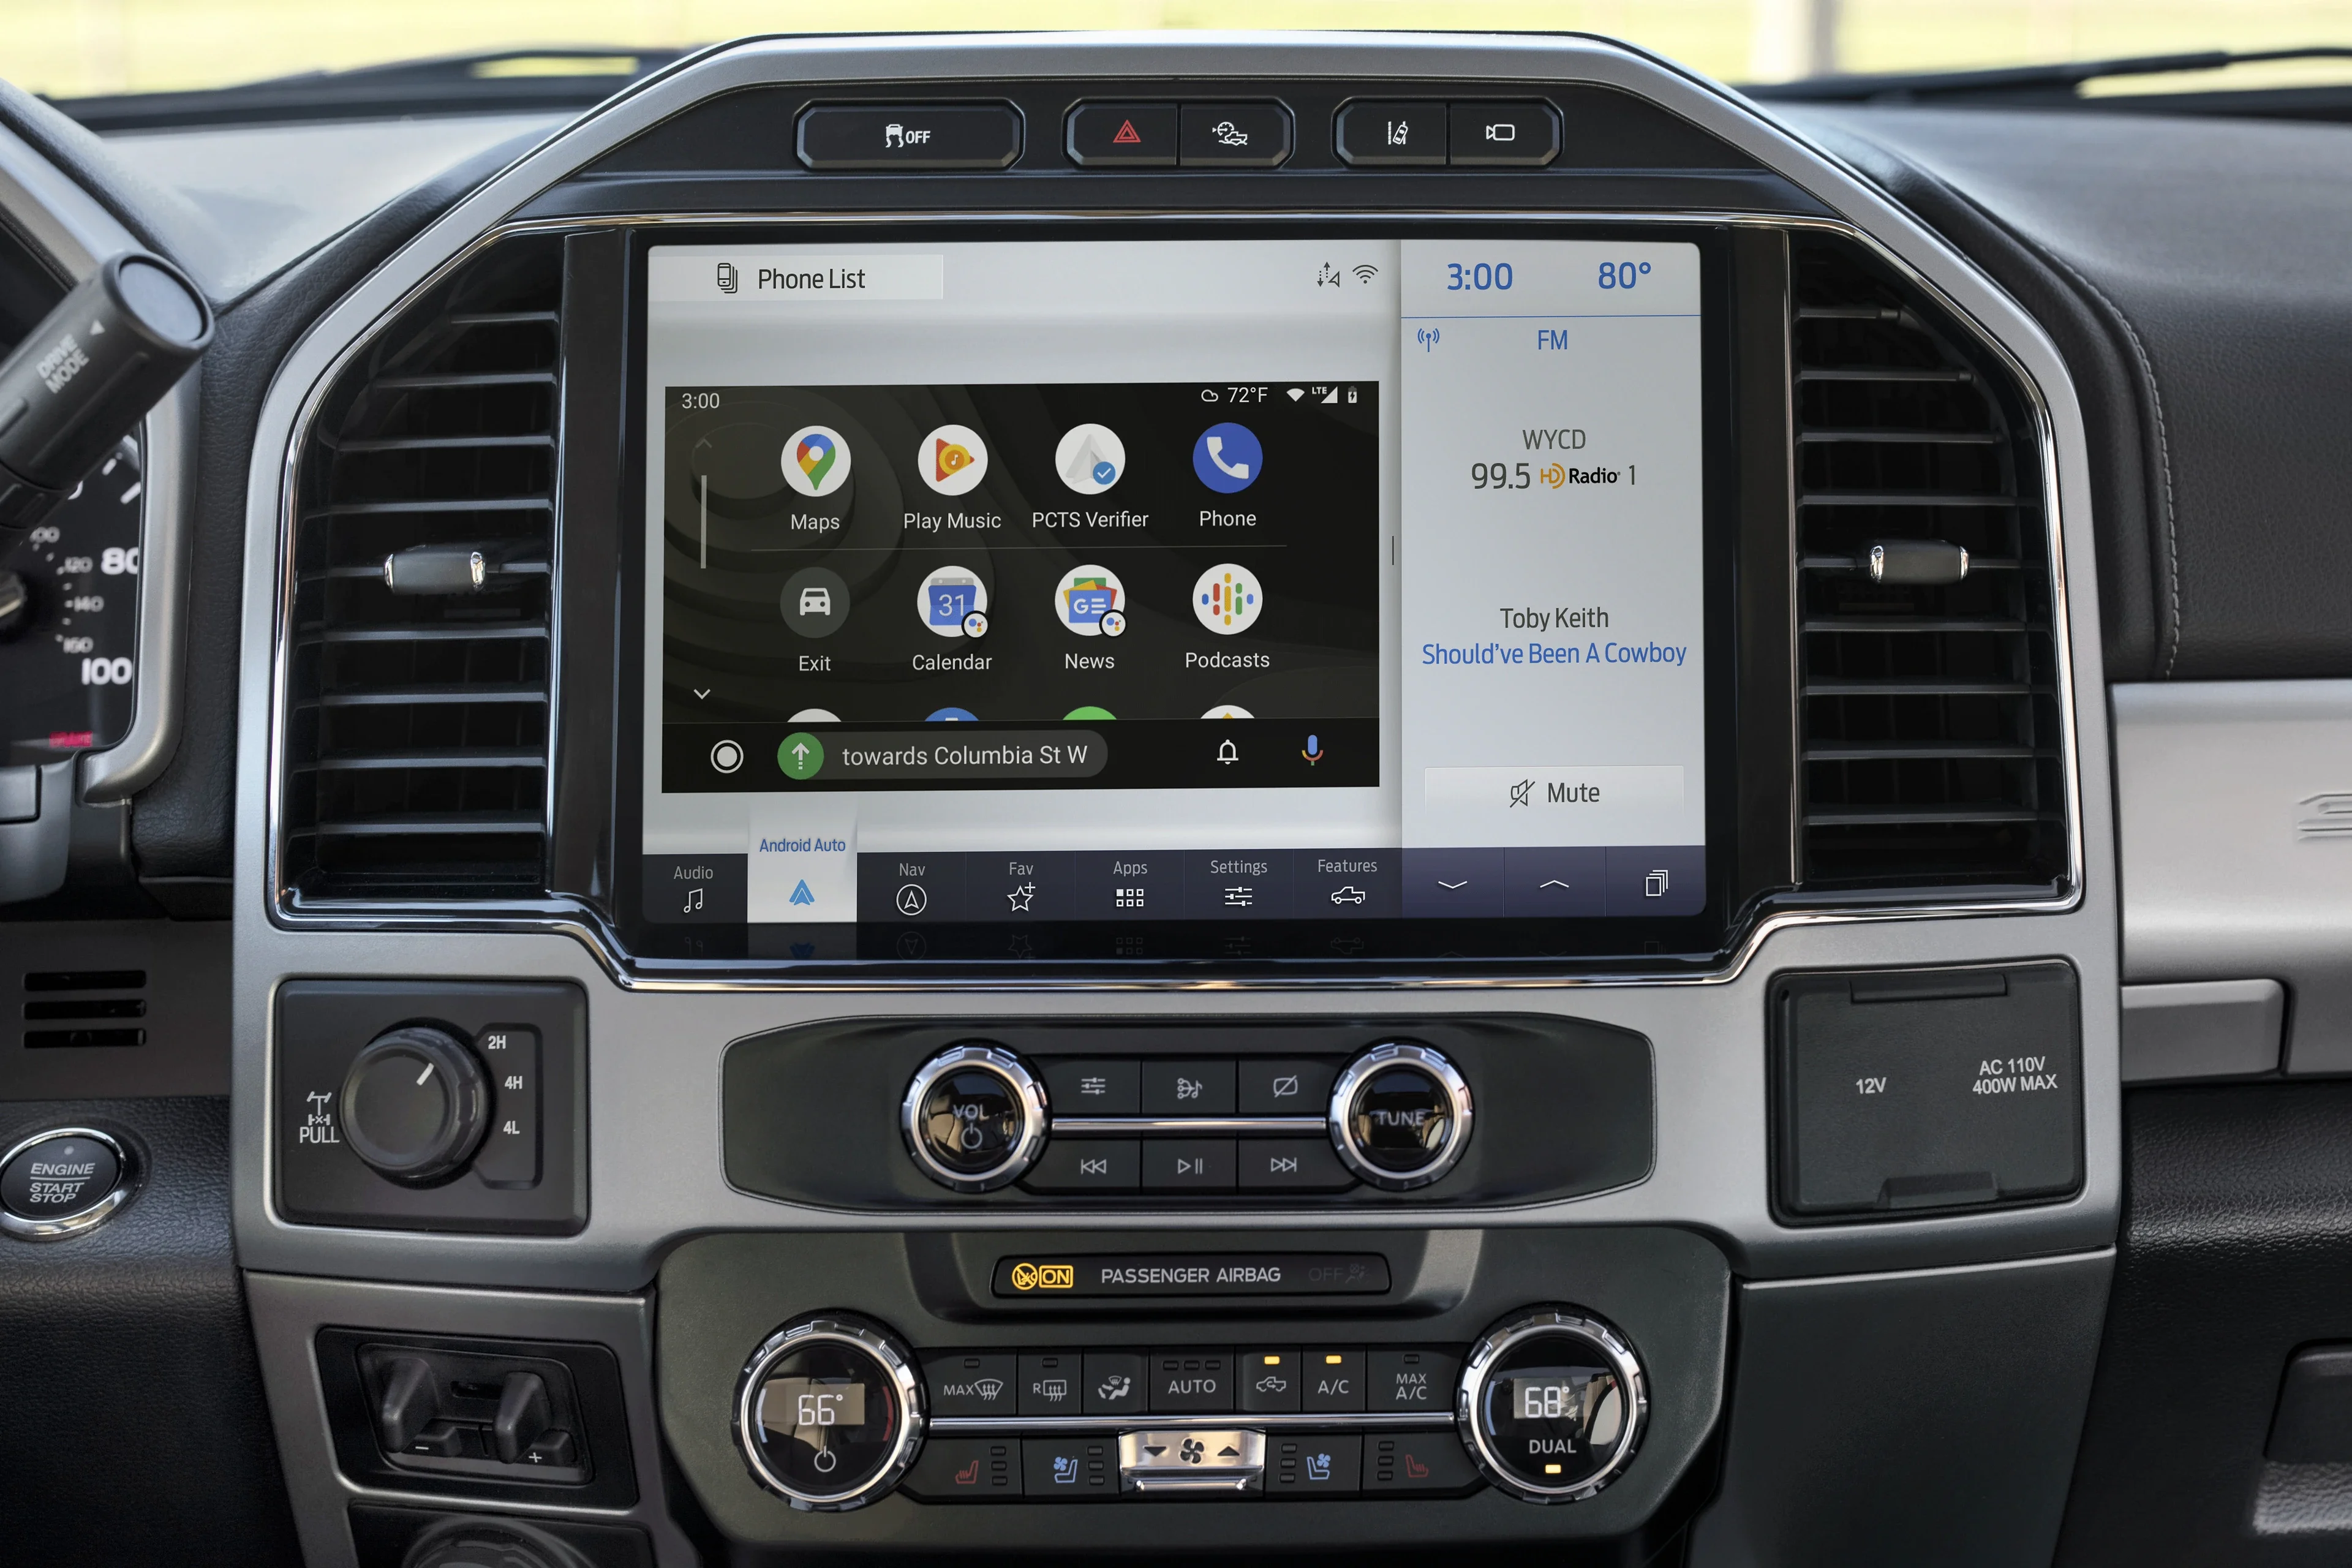 2022 Ford Super Duty Infotainment